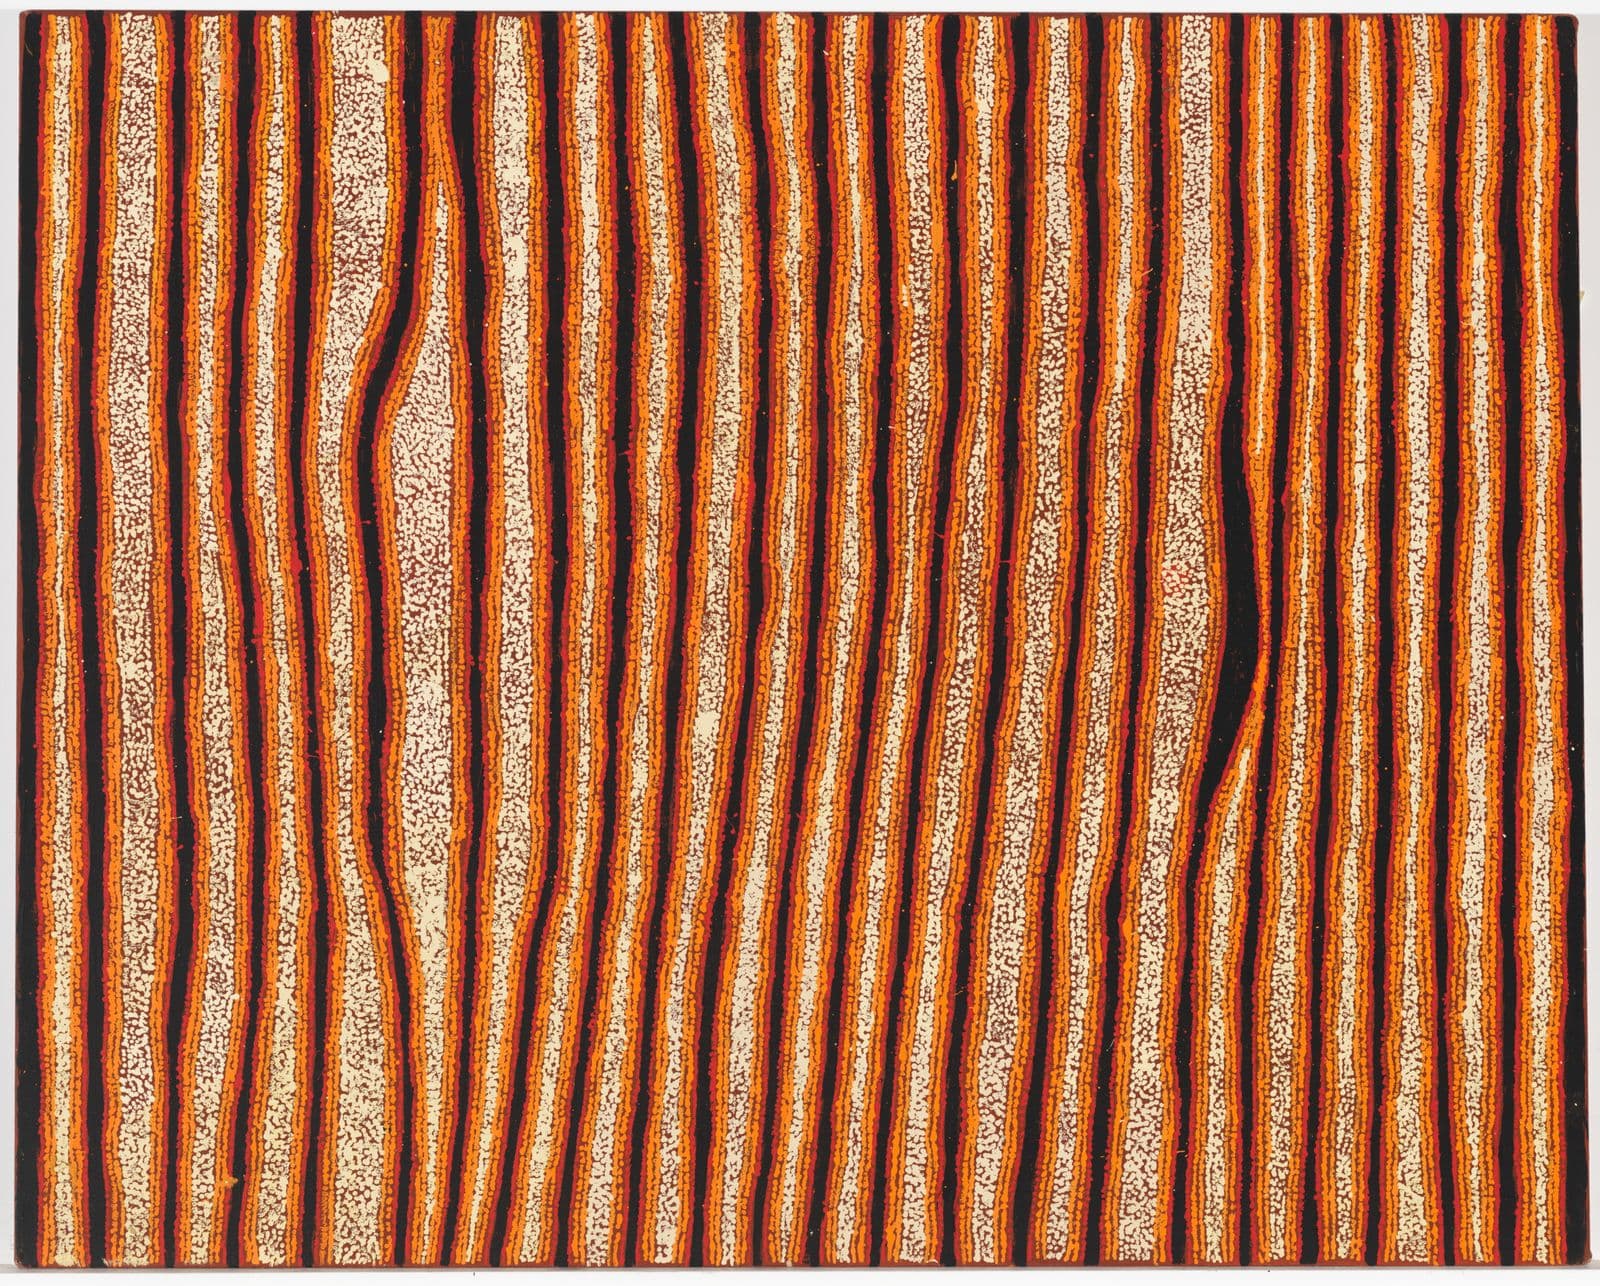 Indigenous painting of black and orange vertical forms